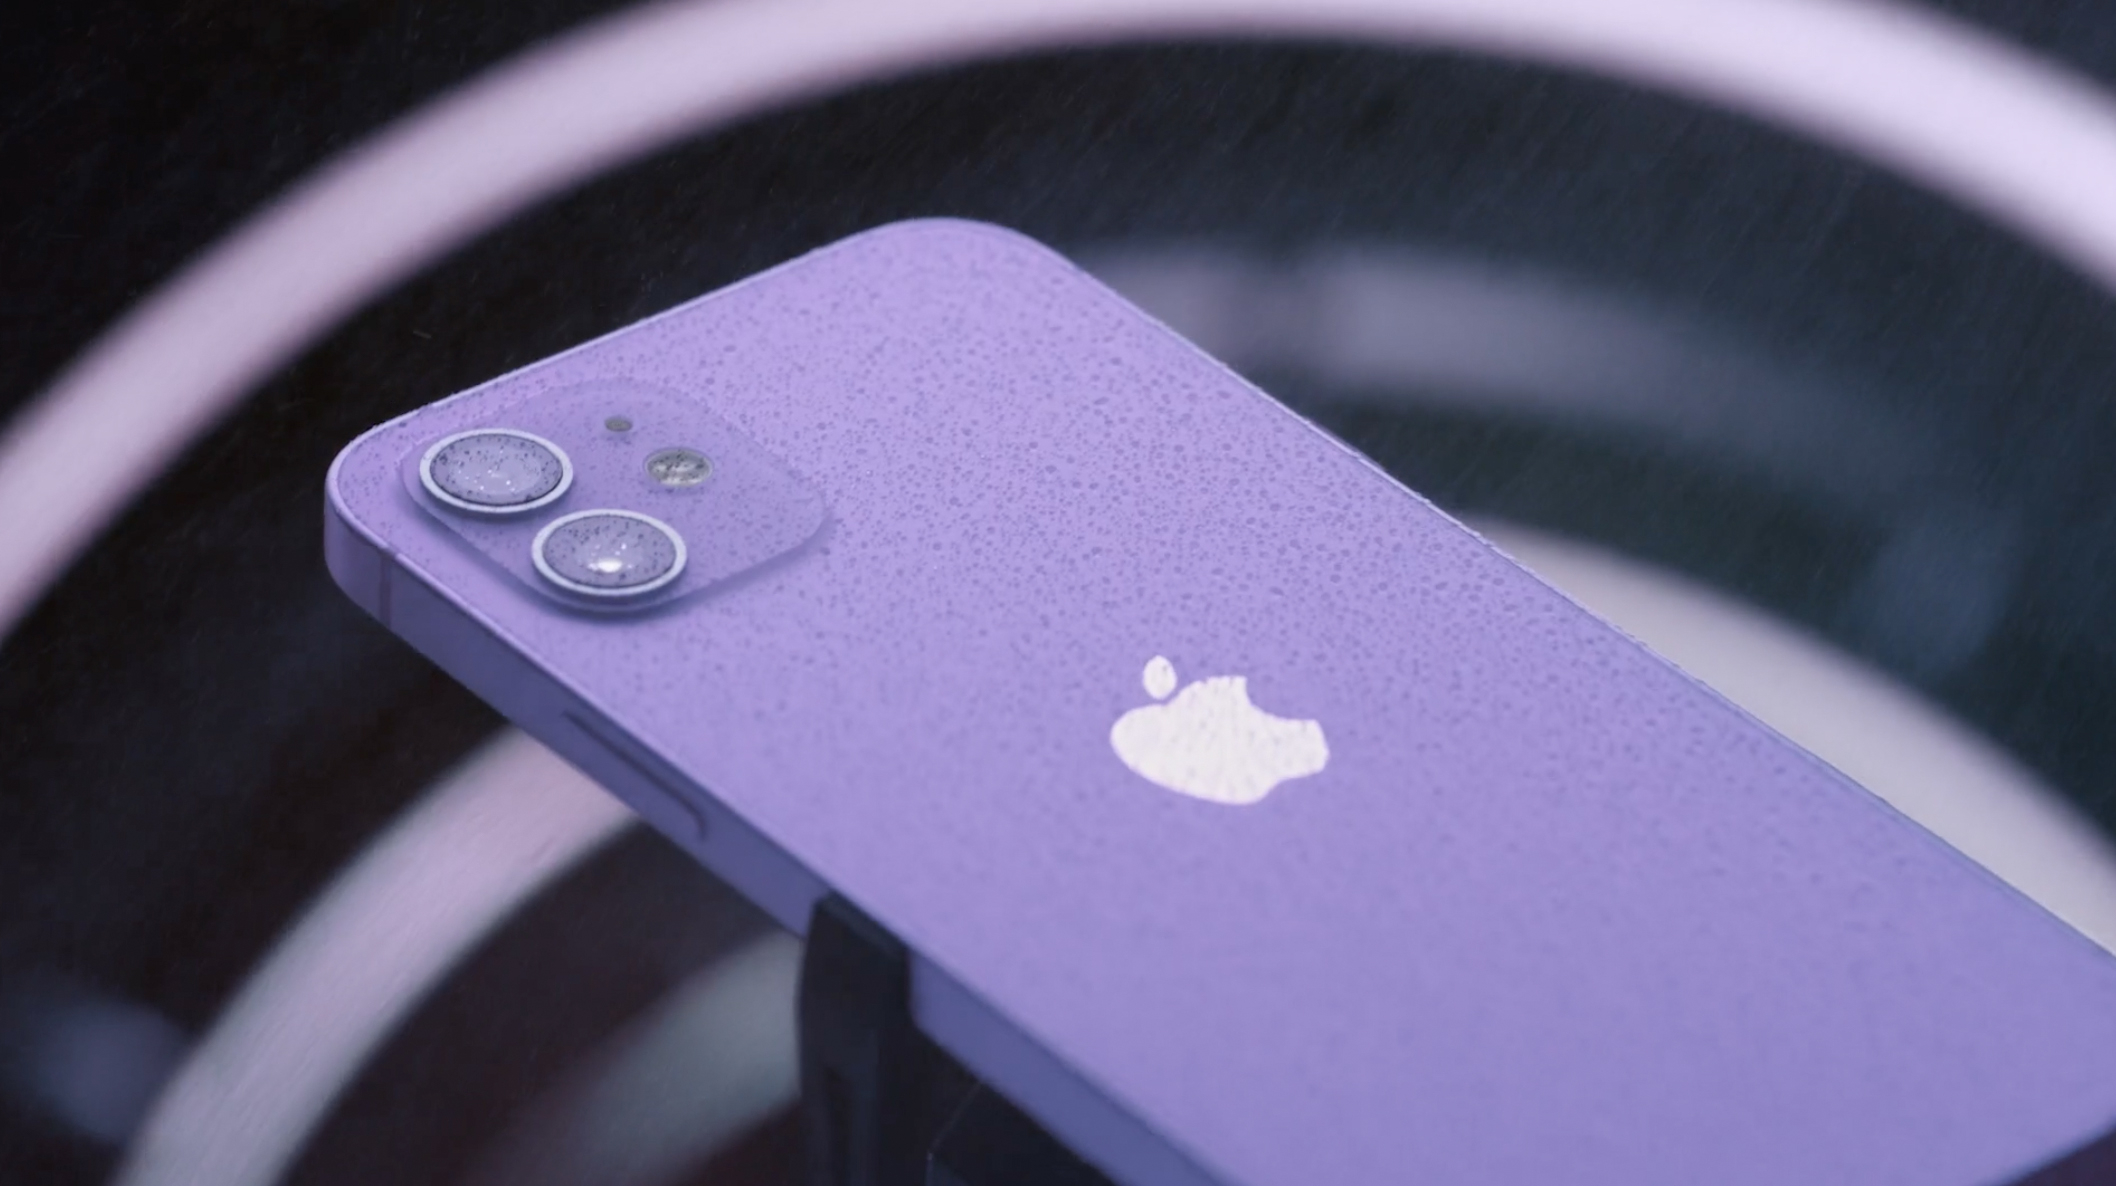 2116x1186 Purple iPhone 12 wallpaper is now available &acirc;&#128;&#148; here's how to grab it | Tom's Guide